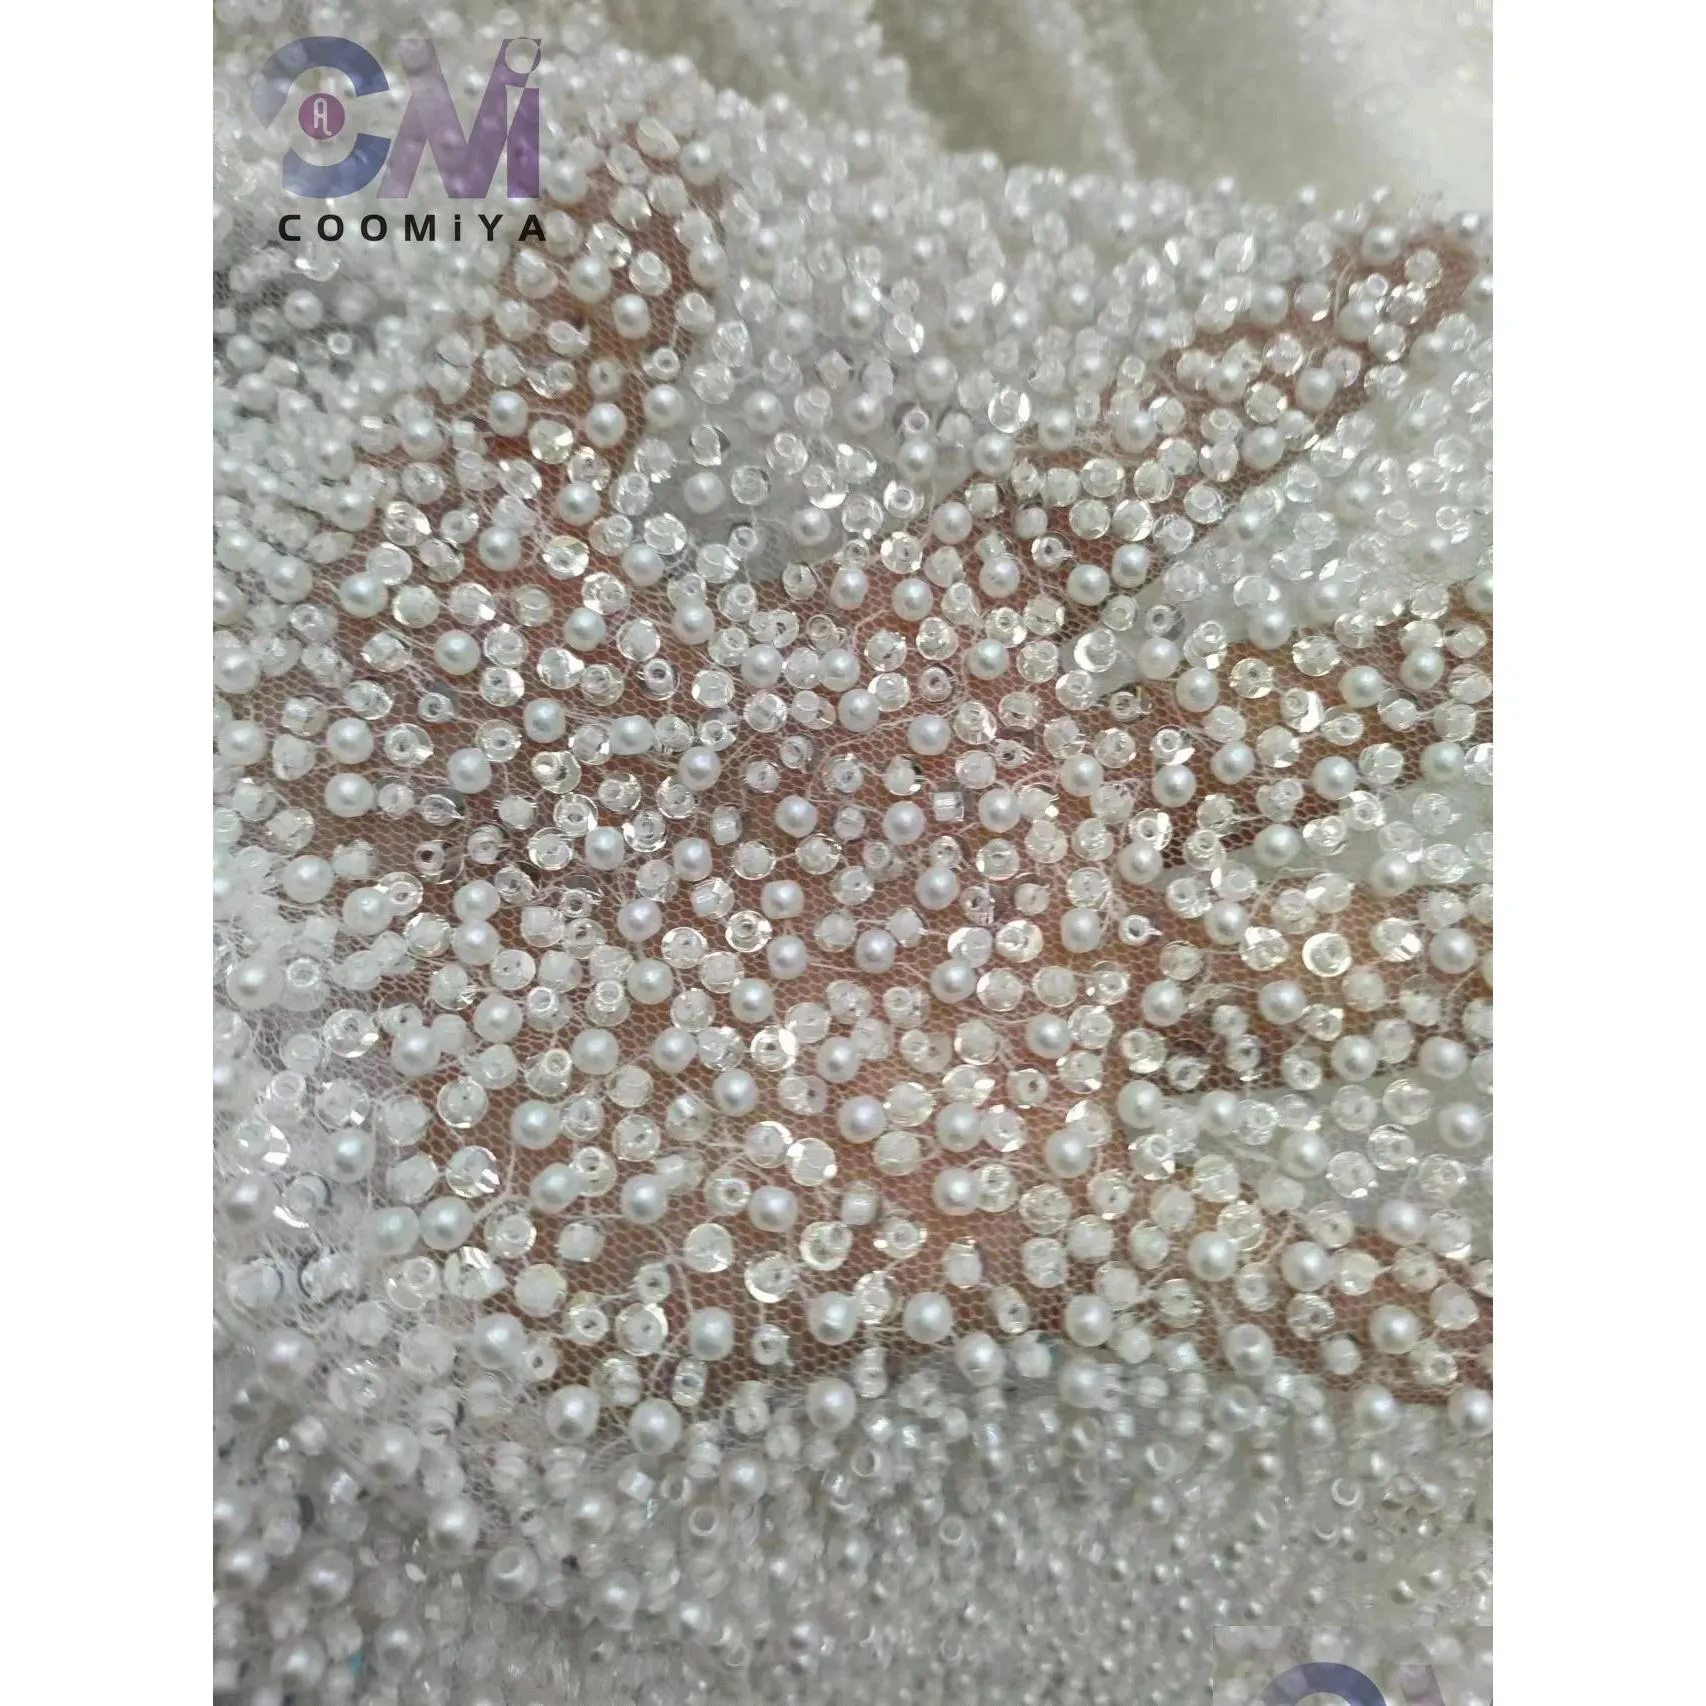 Super Top Quality White Color Full Beads and Sequins Luxury Handmade Fashion Net Lace Fabric For Party Dresses 231226